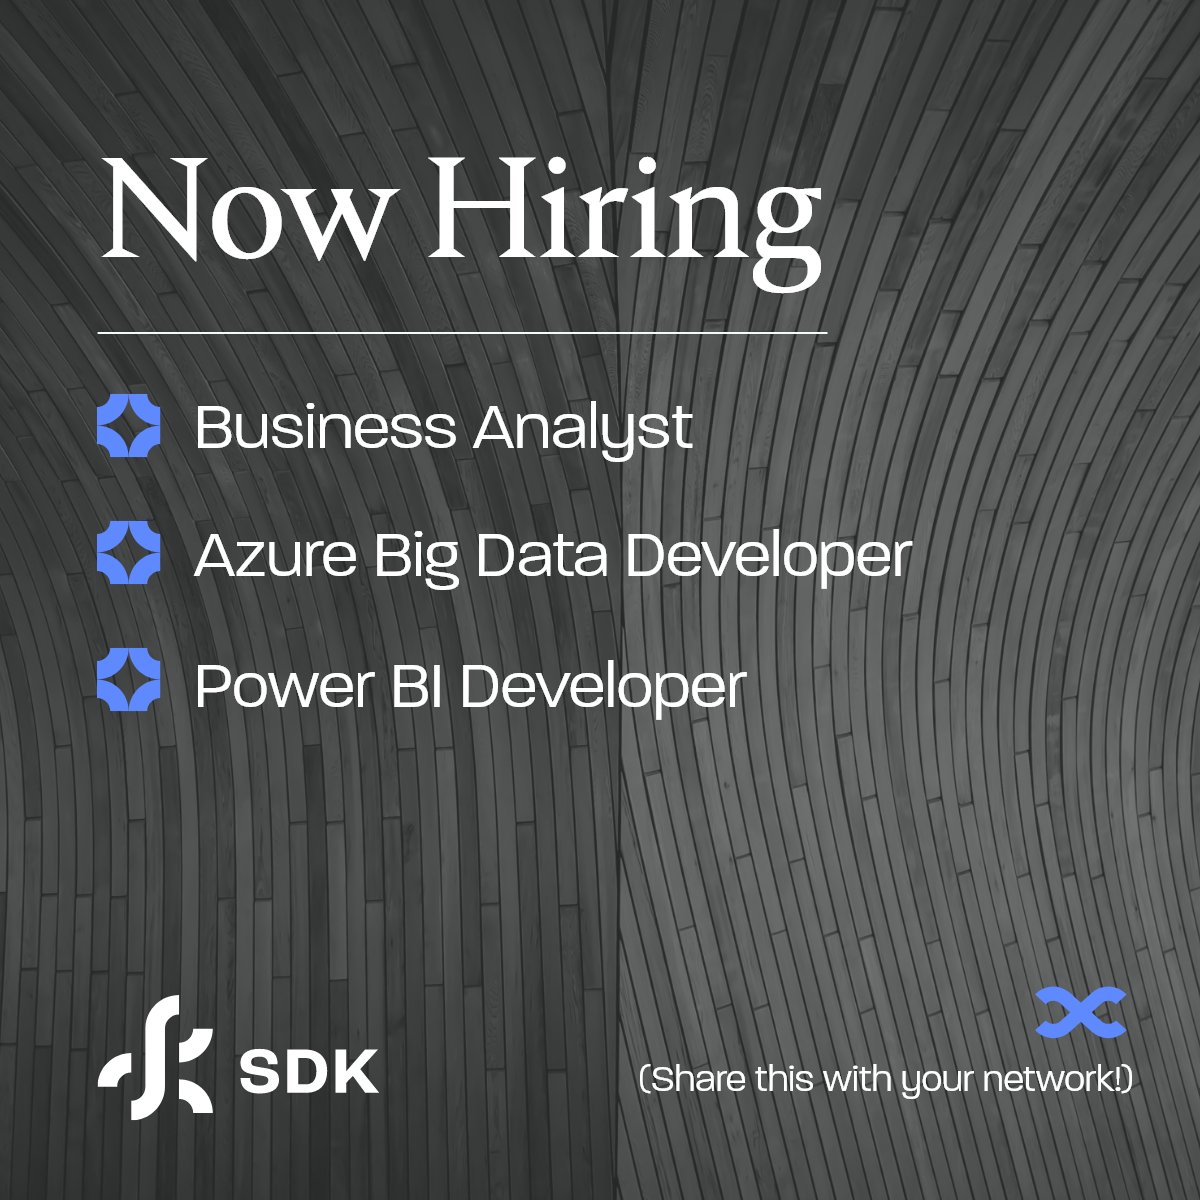 We are adding to our awesome team of people. Check out our website for all of the current opportunities at SDK. No jerks allowed! bit.ly/47m4hE0 #SDKTek #yycjobs #careersintech #bigdata #powerbi